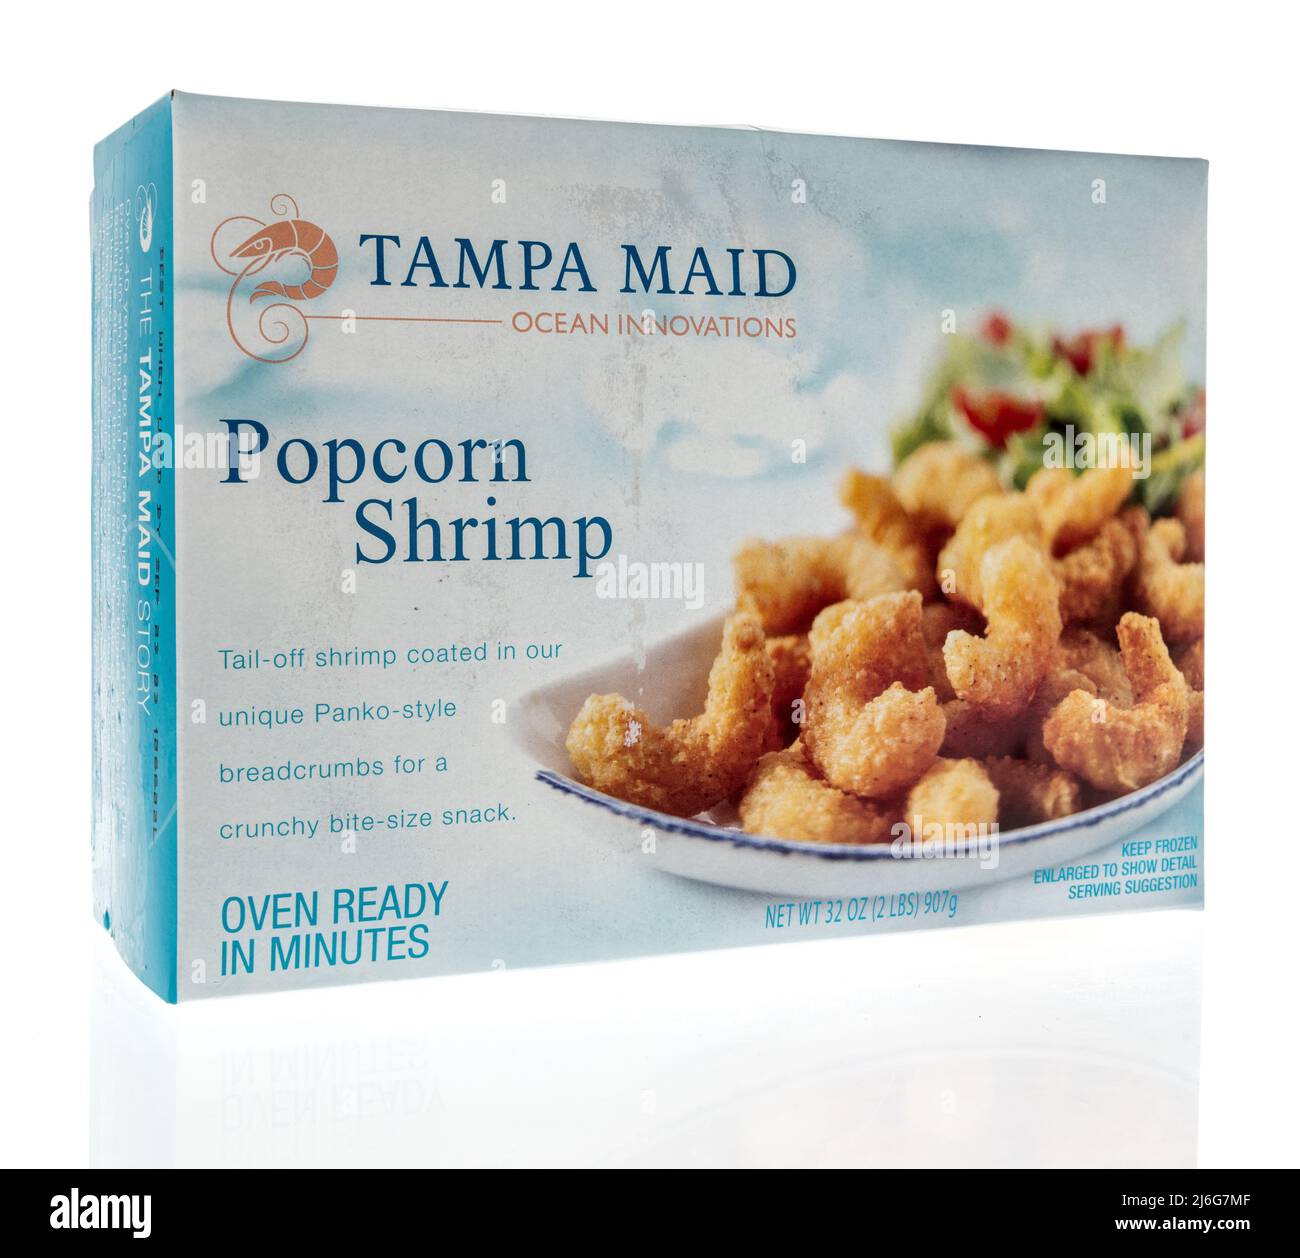 Winneconne, WI -23 April 2022: A package of Tampa Maid ocean innovations popcorn shrimp on an isolated background Stock Photo